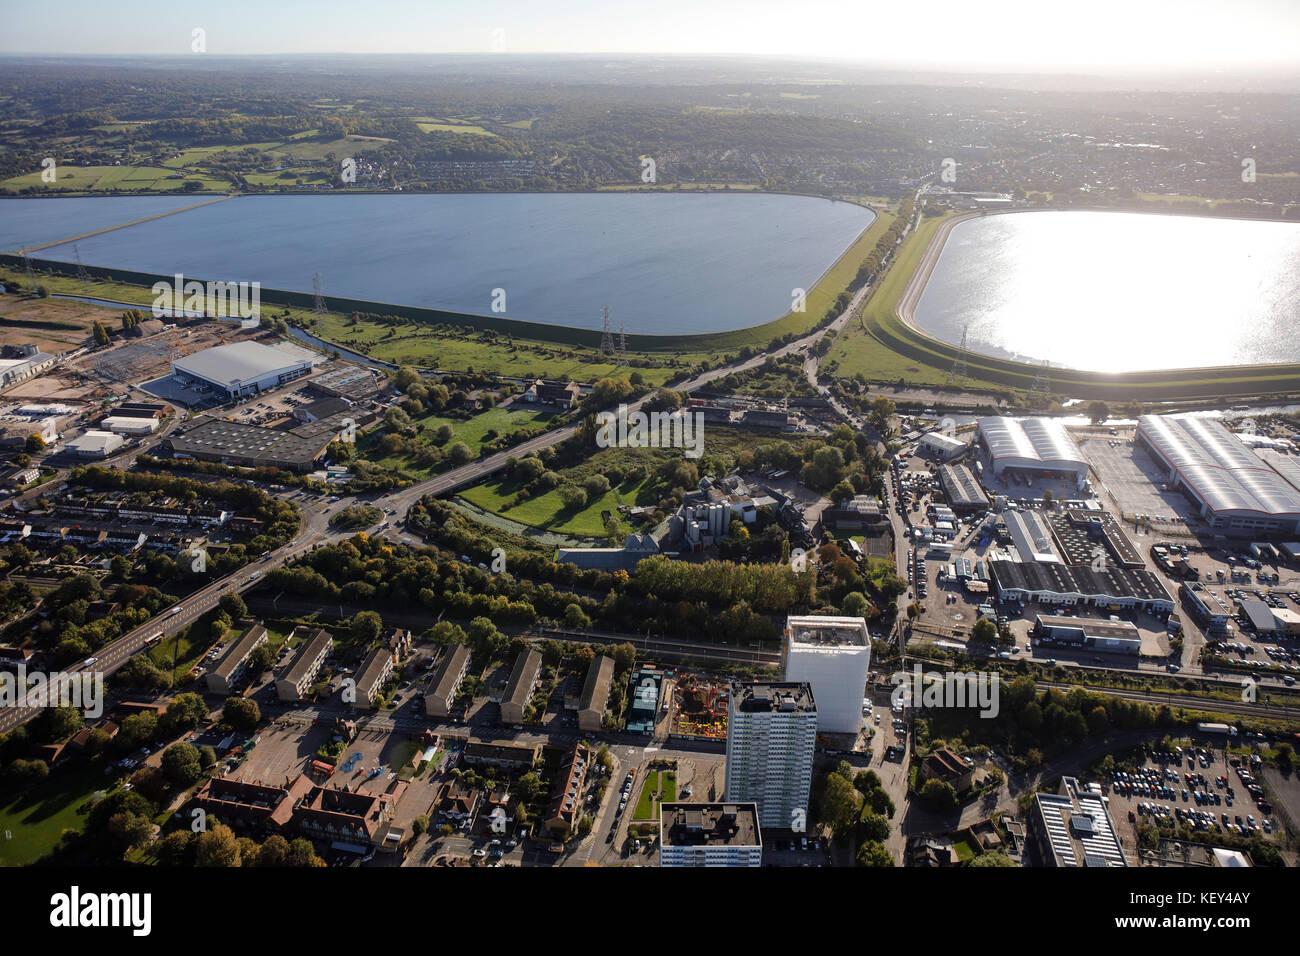 An aerial view of the King George Reservoir in the Lea Valley, East London Stock Photo